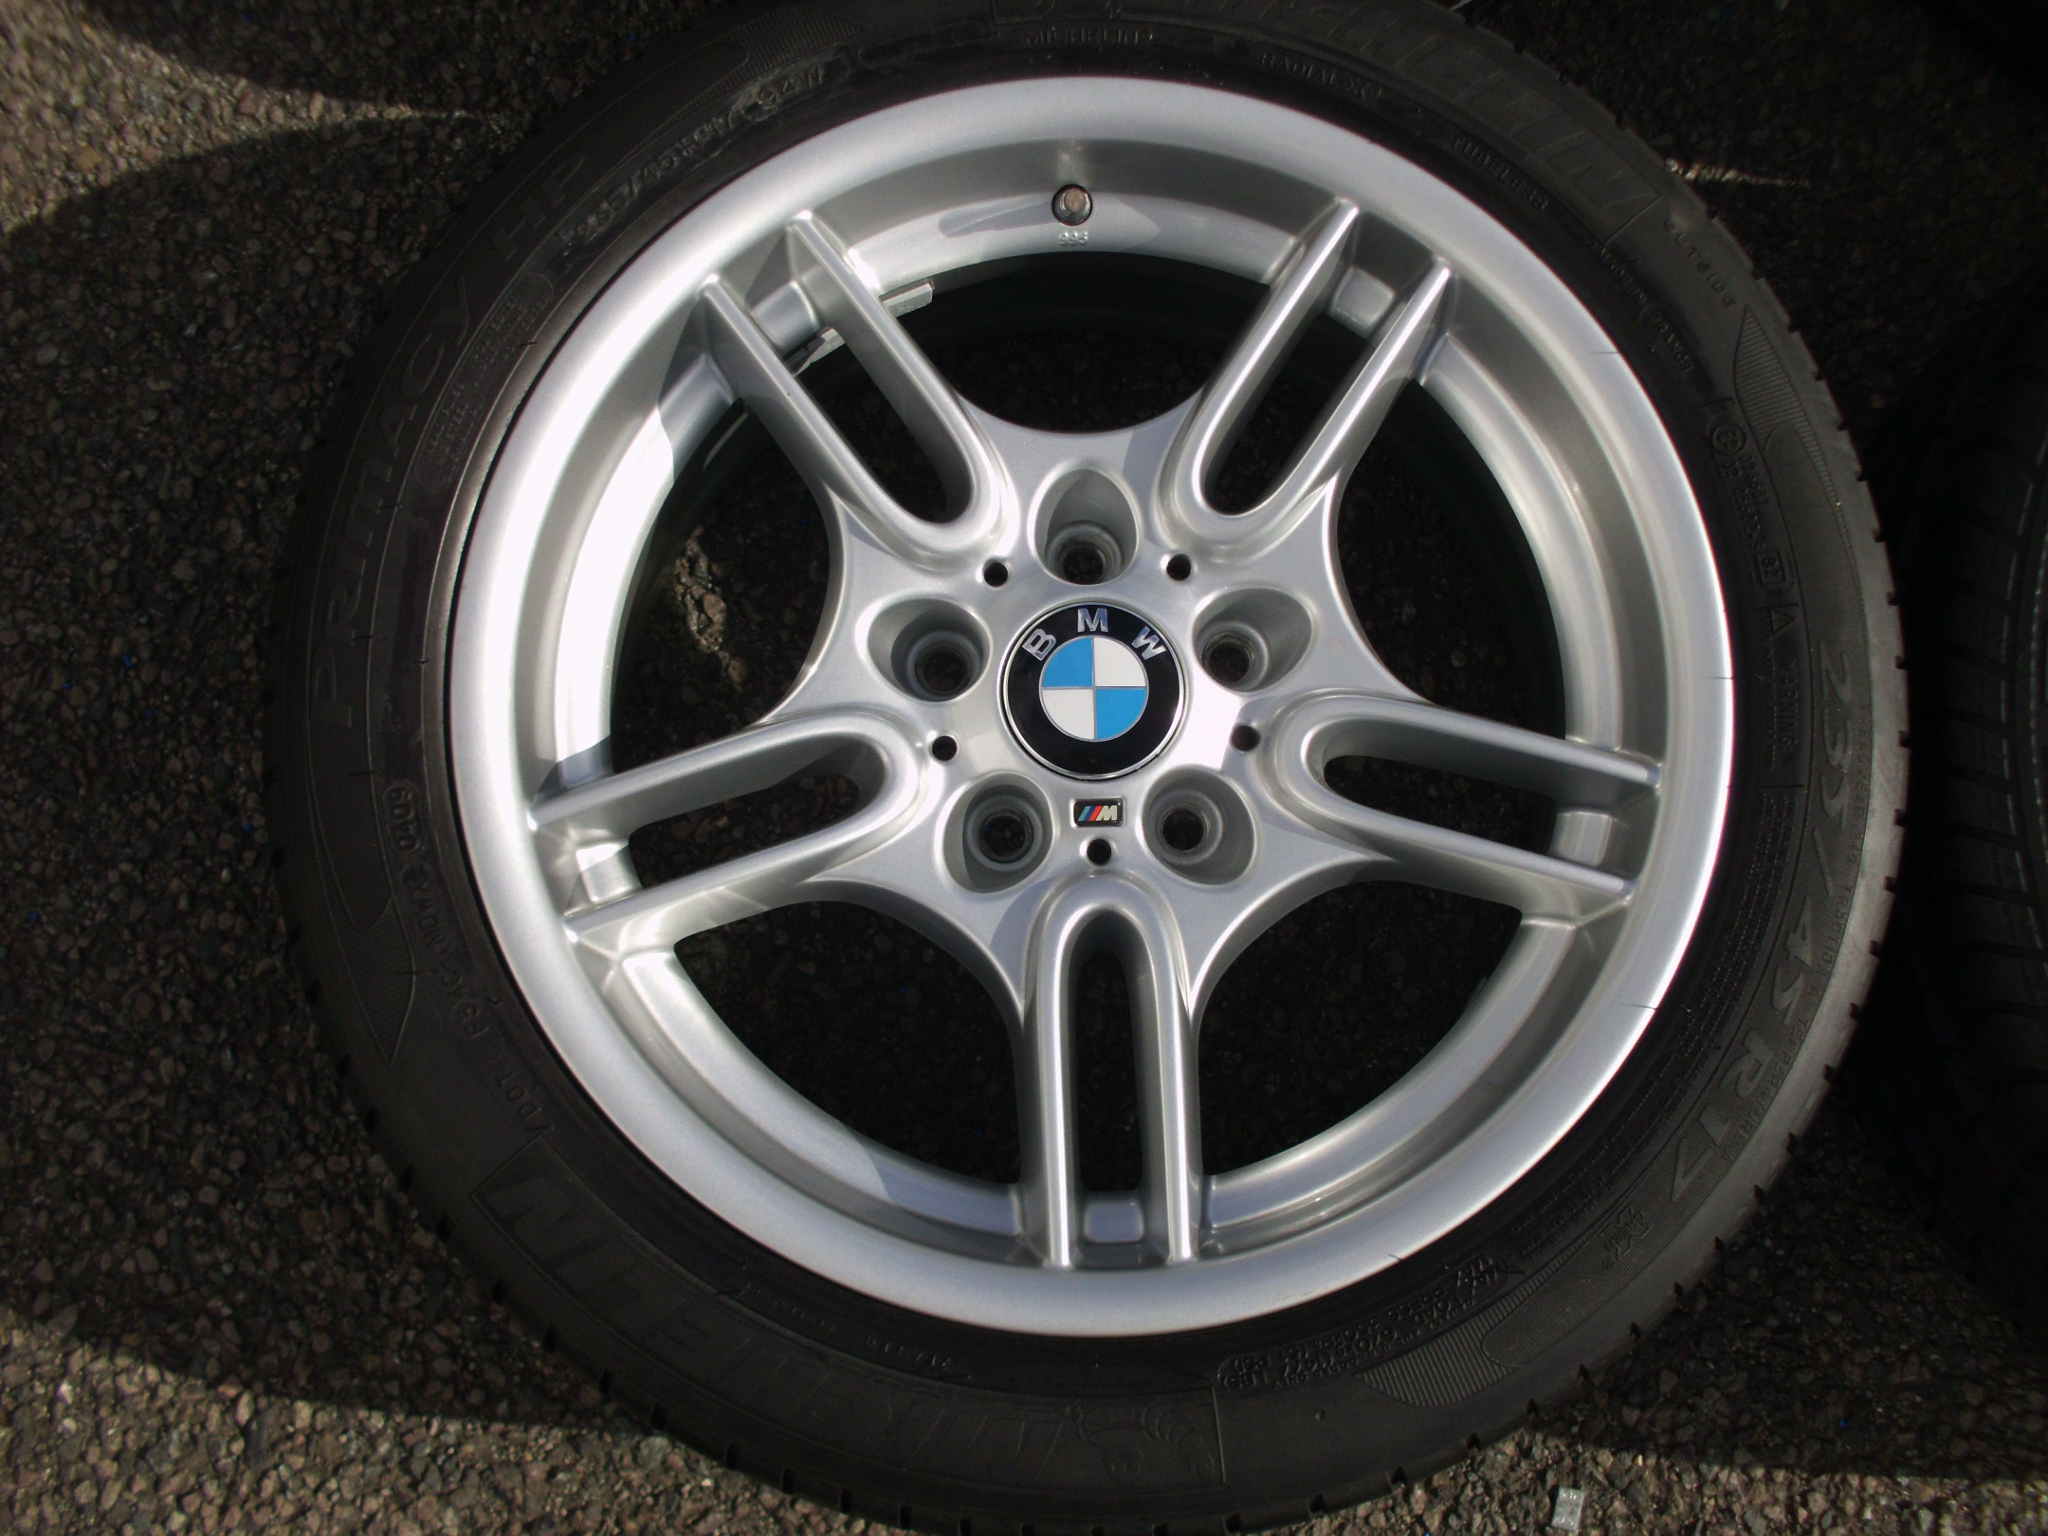 USED 17" GENUINE BMW STYLE 66 E39 M SPORT ALLOY WHEELS,EXCELLENT NEAR UNMARKED CONDITION, INC VG GOOD TYRES